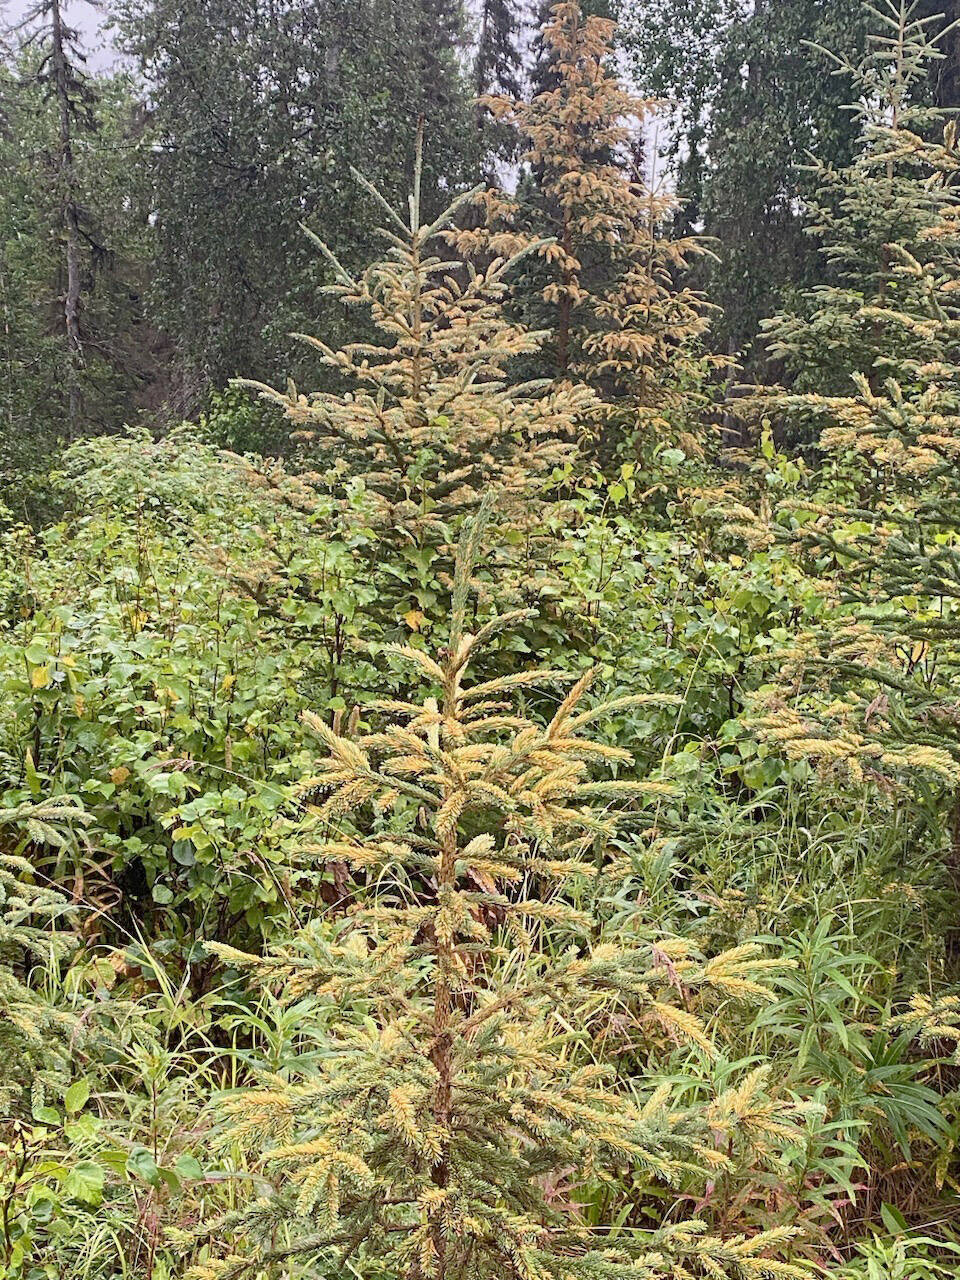 Spruce trees on the Kenai Peninsula show the magnitude of spruce tip rust this year. (Photo by Todd Esklin/USFWS)